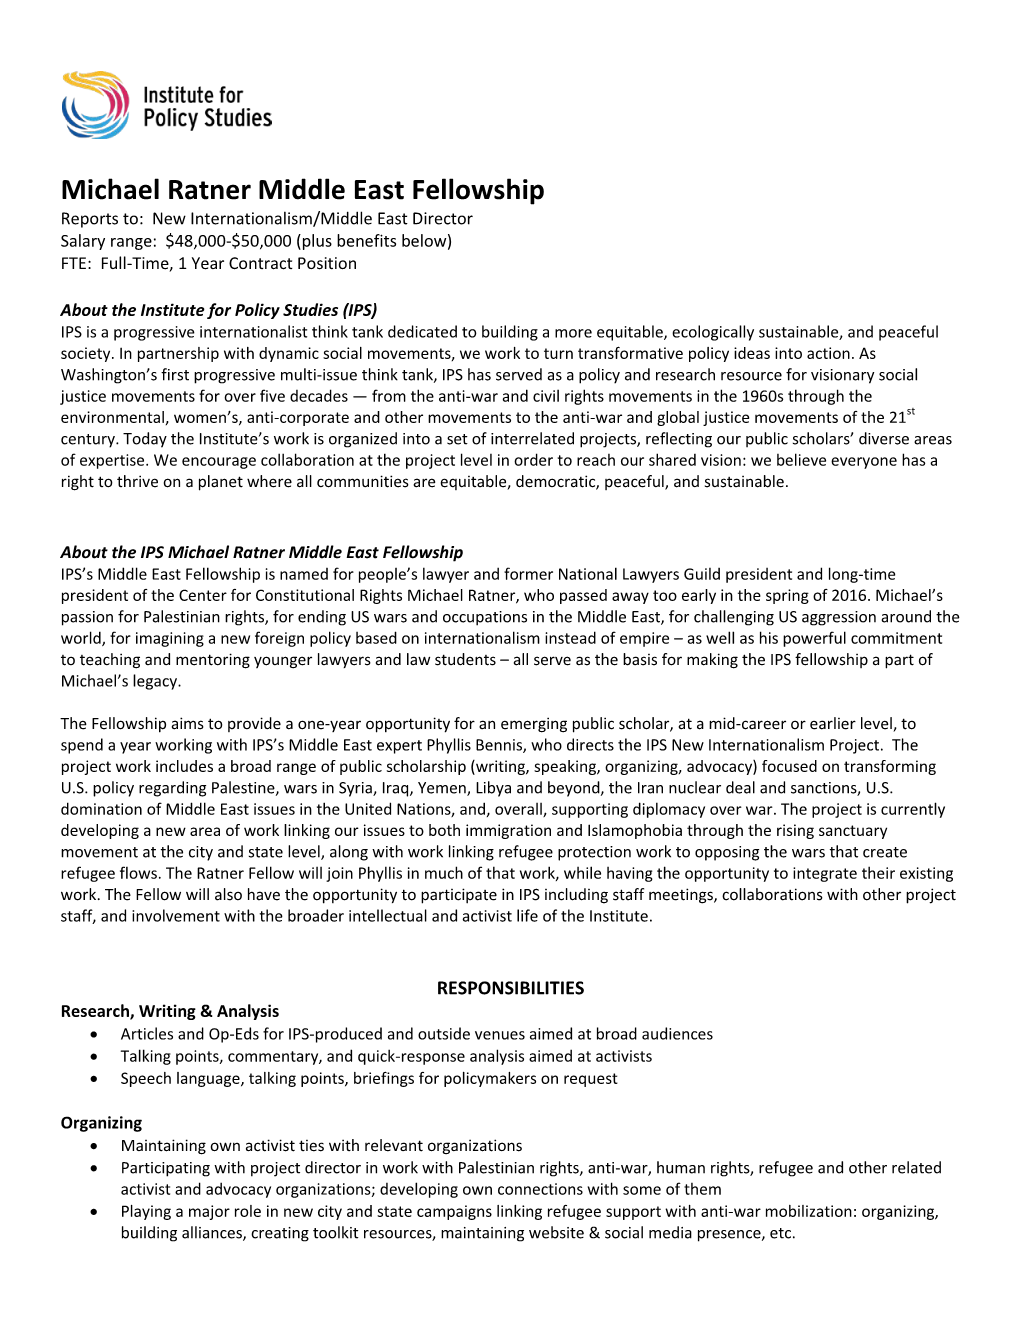 Michael Ratner Middle East Fellowship